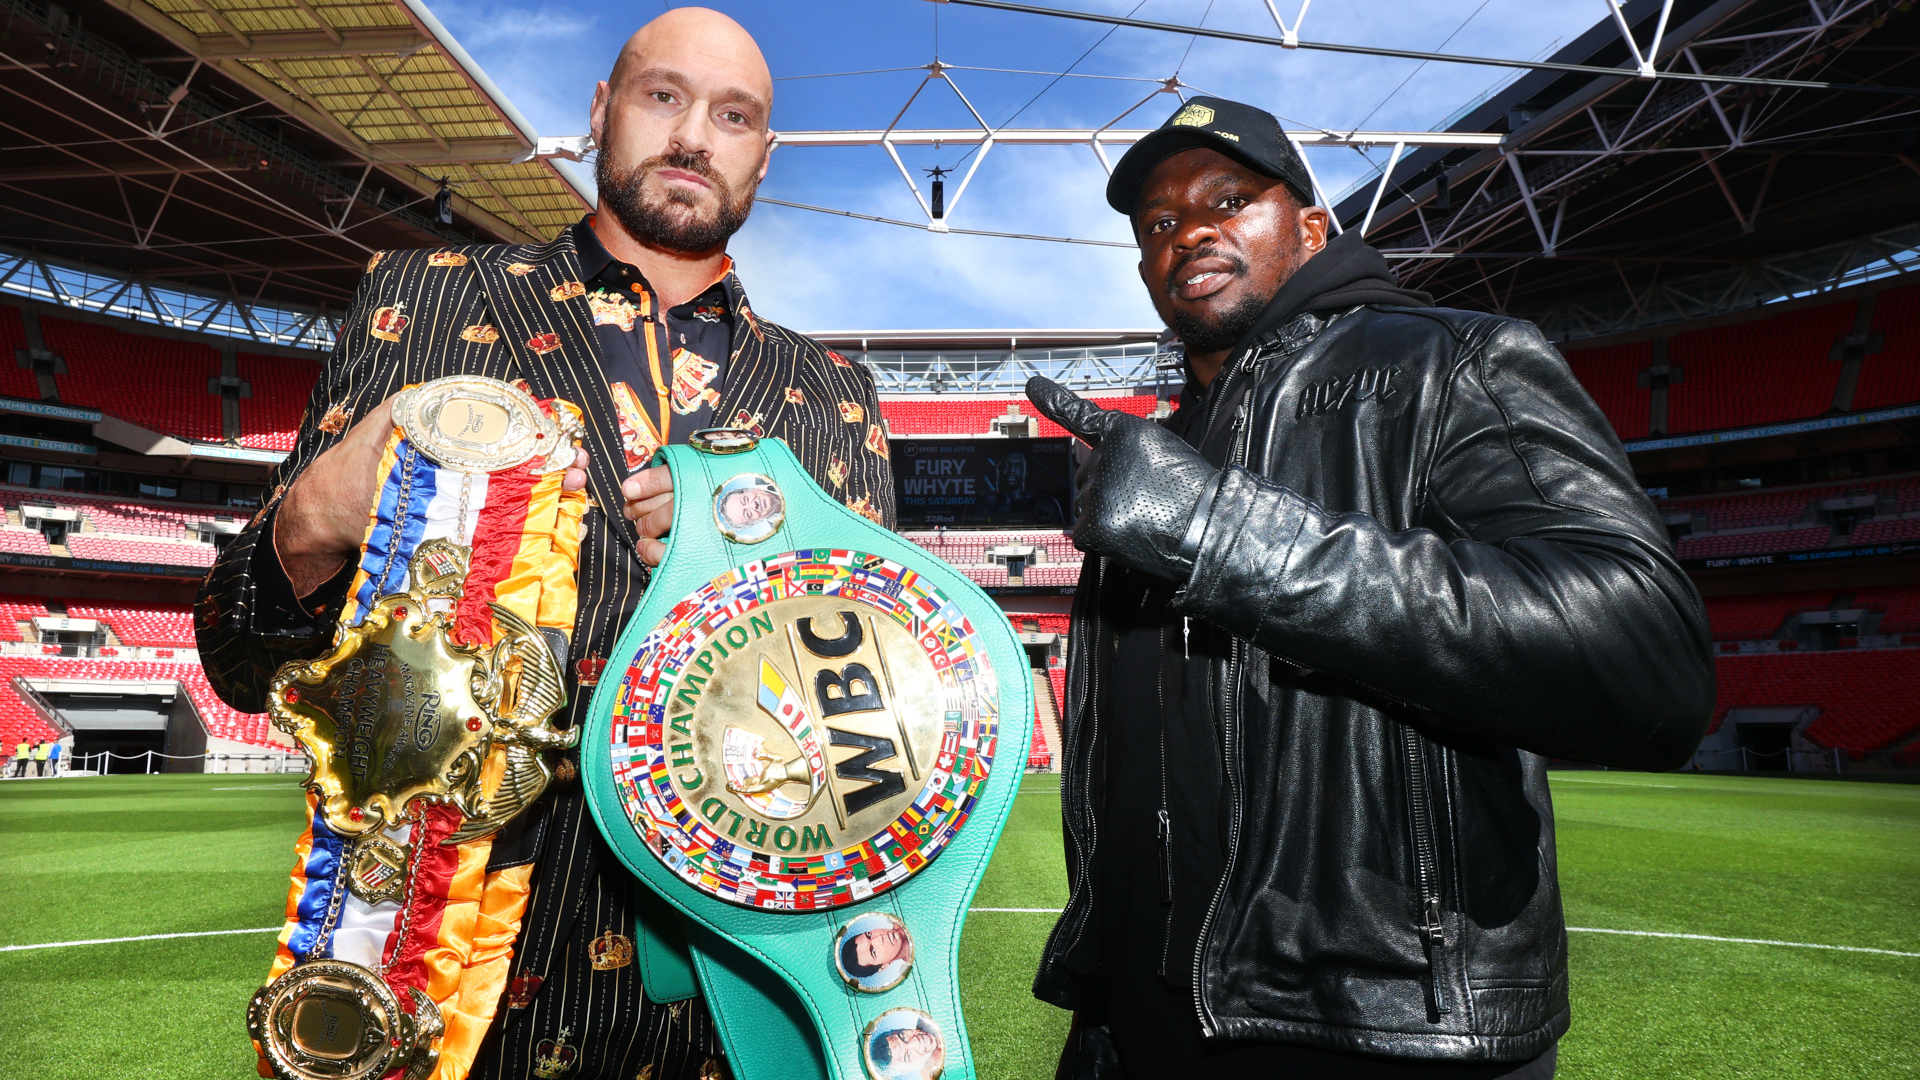 Tyson Fury vs Dillian Whyte live stream and how to watch the boxing highlights online What Hi-Fi?